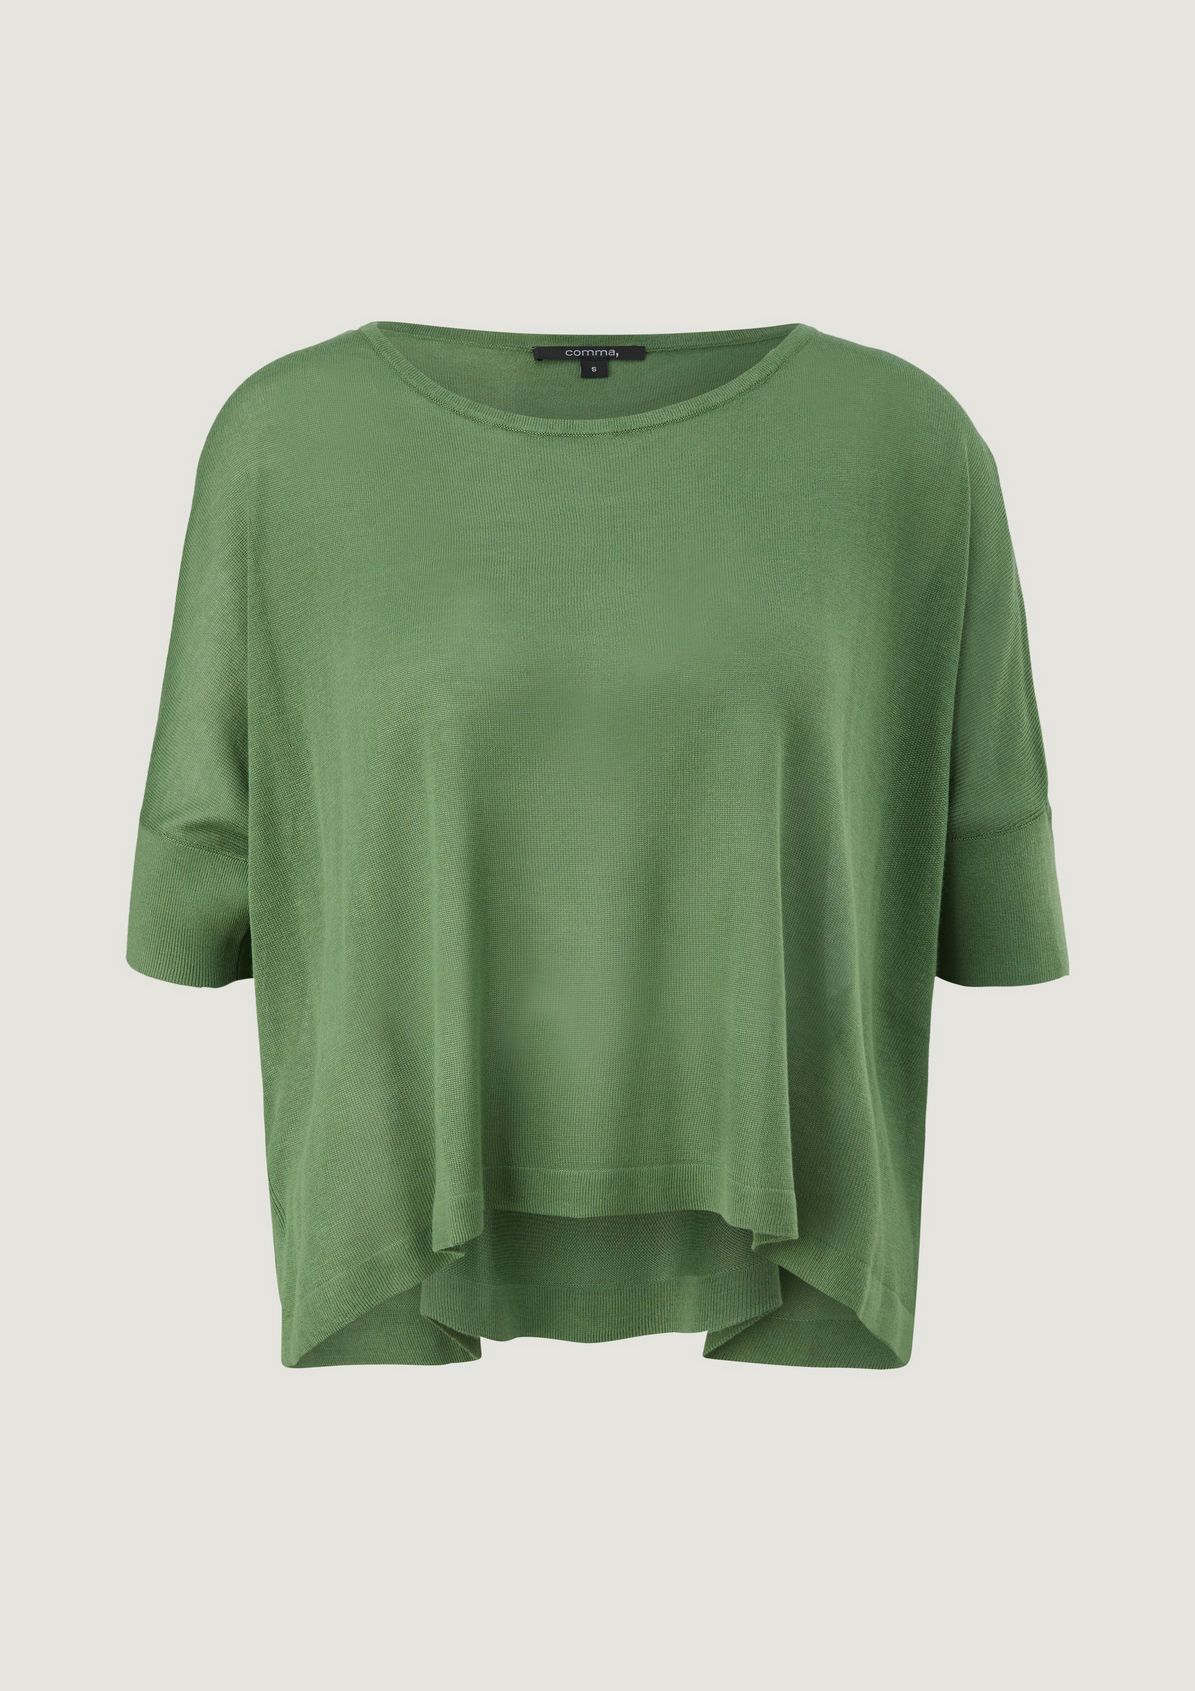 Viscose top with batwing sleeves from comma